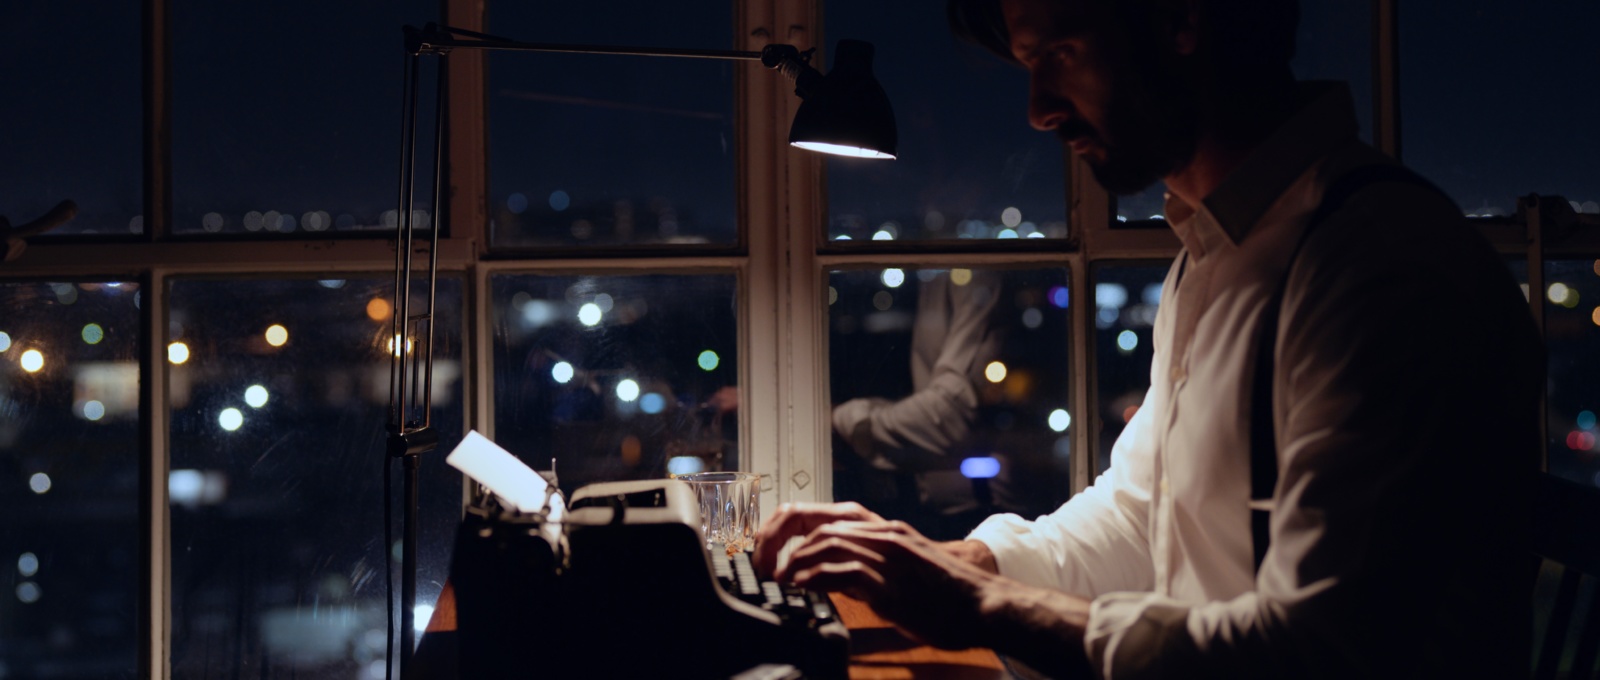 Side profile of a man wearing a white shirt and suspenders using a typewriter at night by windows overlooking a city